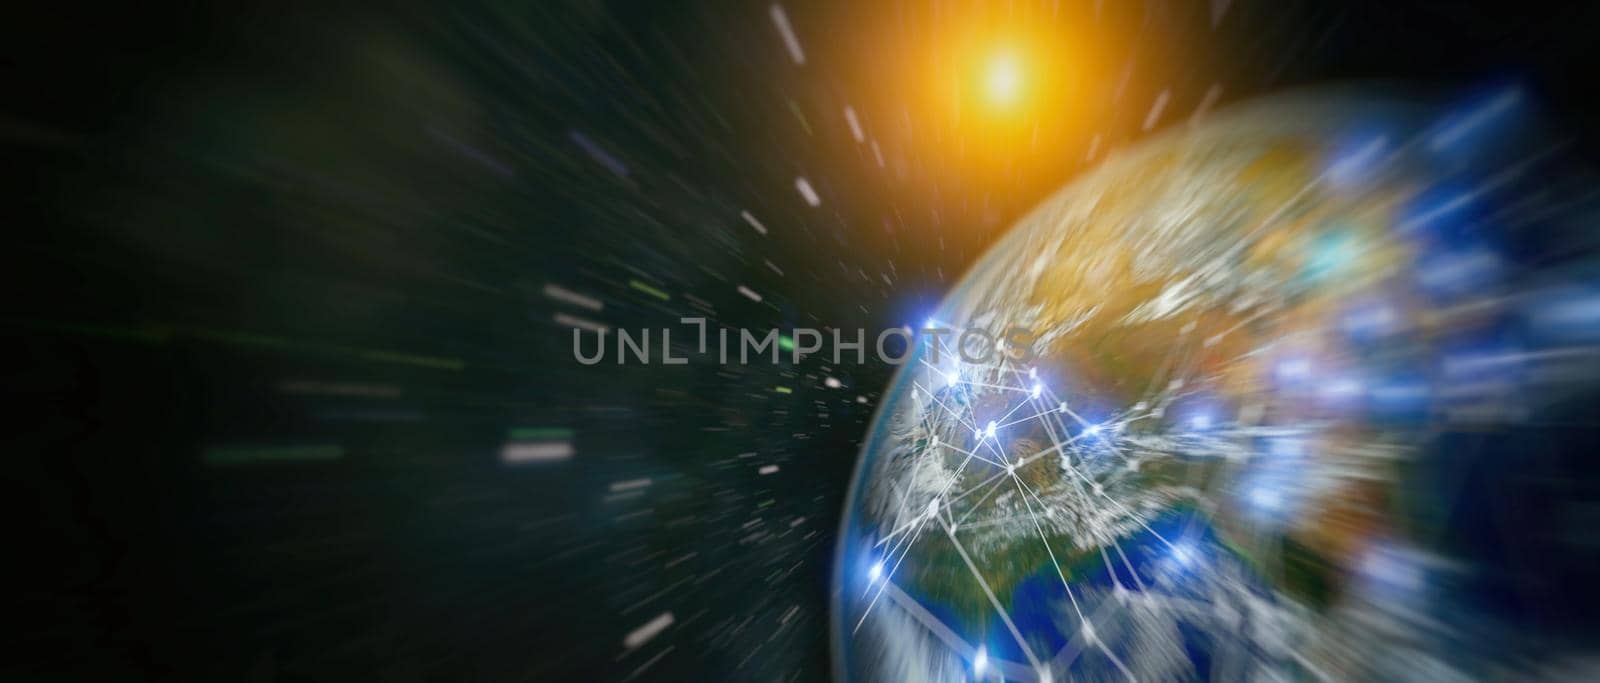 Global digital Network Telecommunication network above Earth viewed from space with connected system